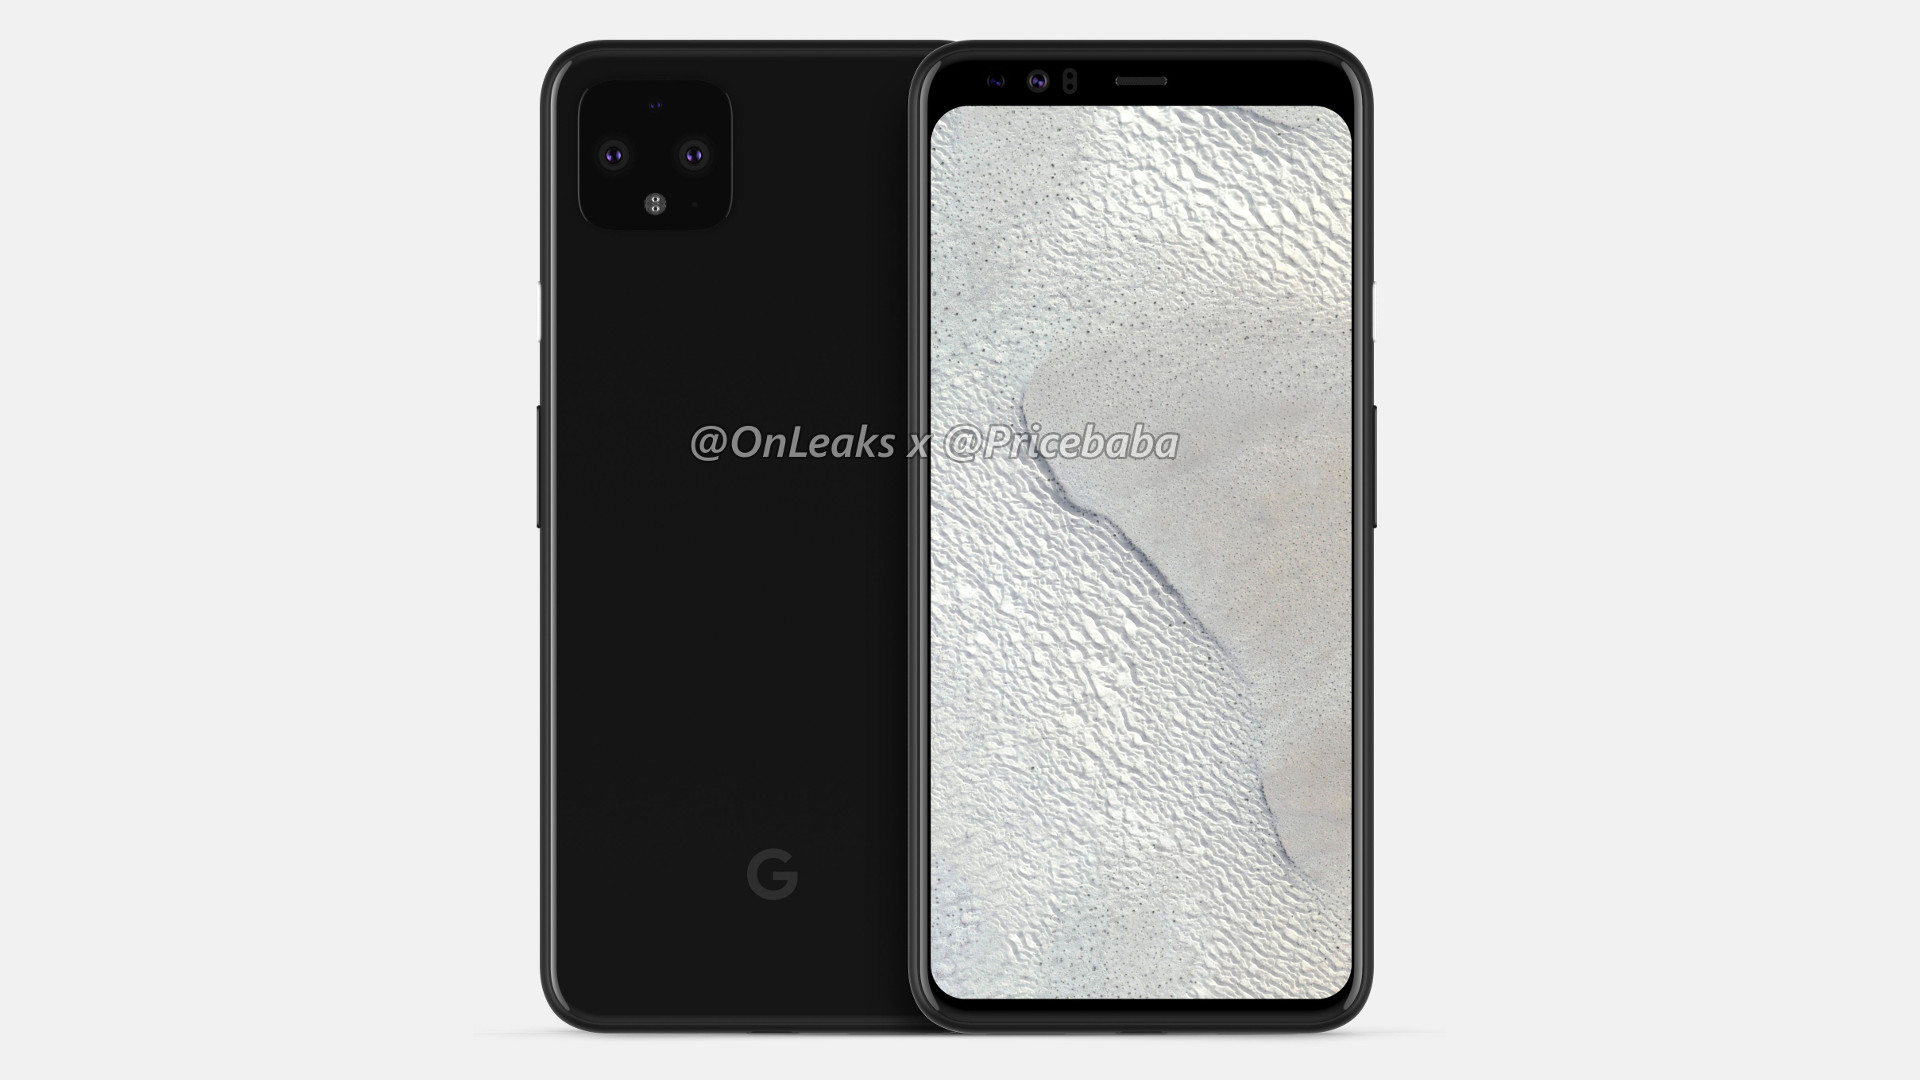 The Google Pixel 4 XL front and back renders.